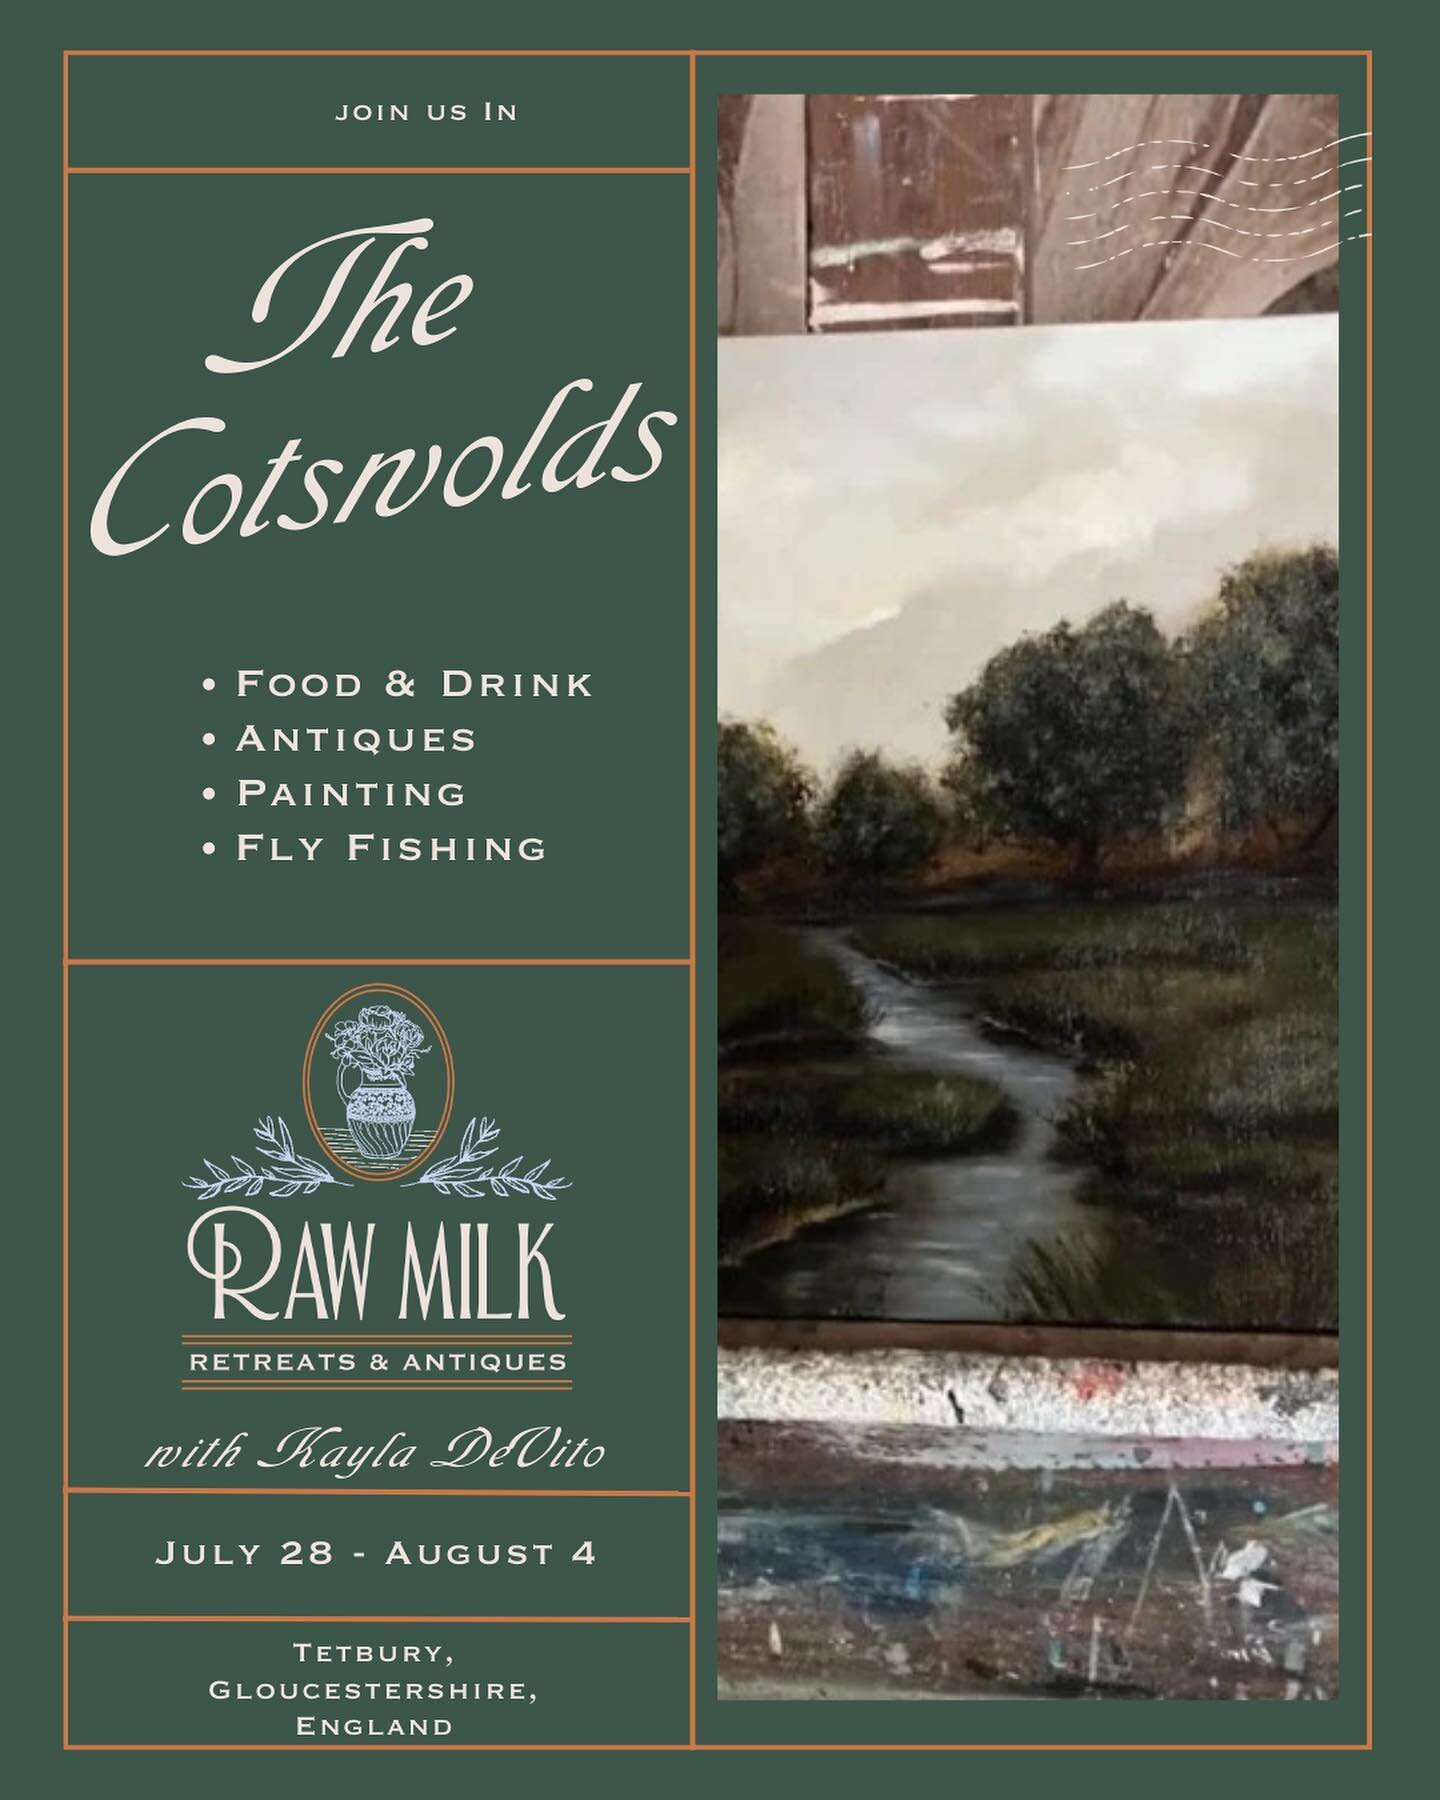 I&rsquo;m absolutely thrilled to announce that Kayla DeVito of @amidstthealders will be joining us in the Cotswolds this summer! She will be running painting workshops over the course of our week&rsquo;s stay in gorgeous Tetbury. A handful of rooms r